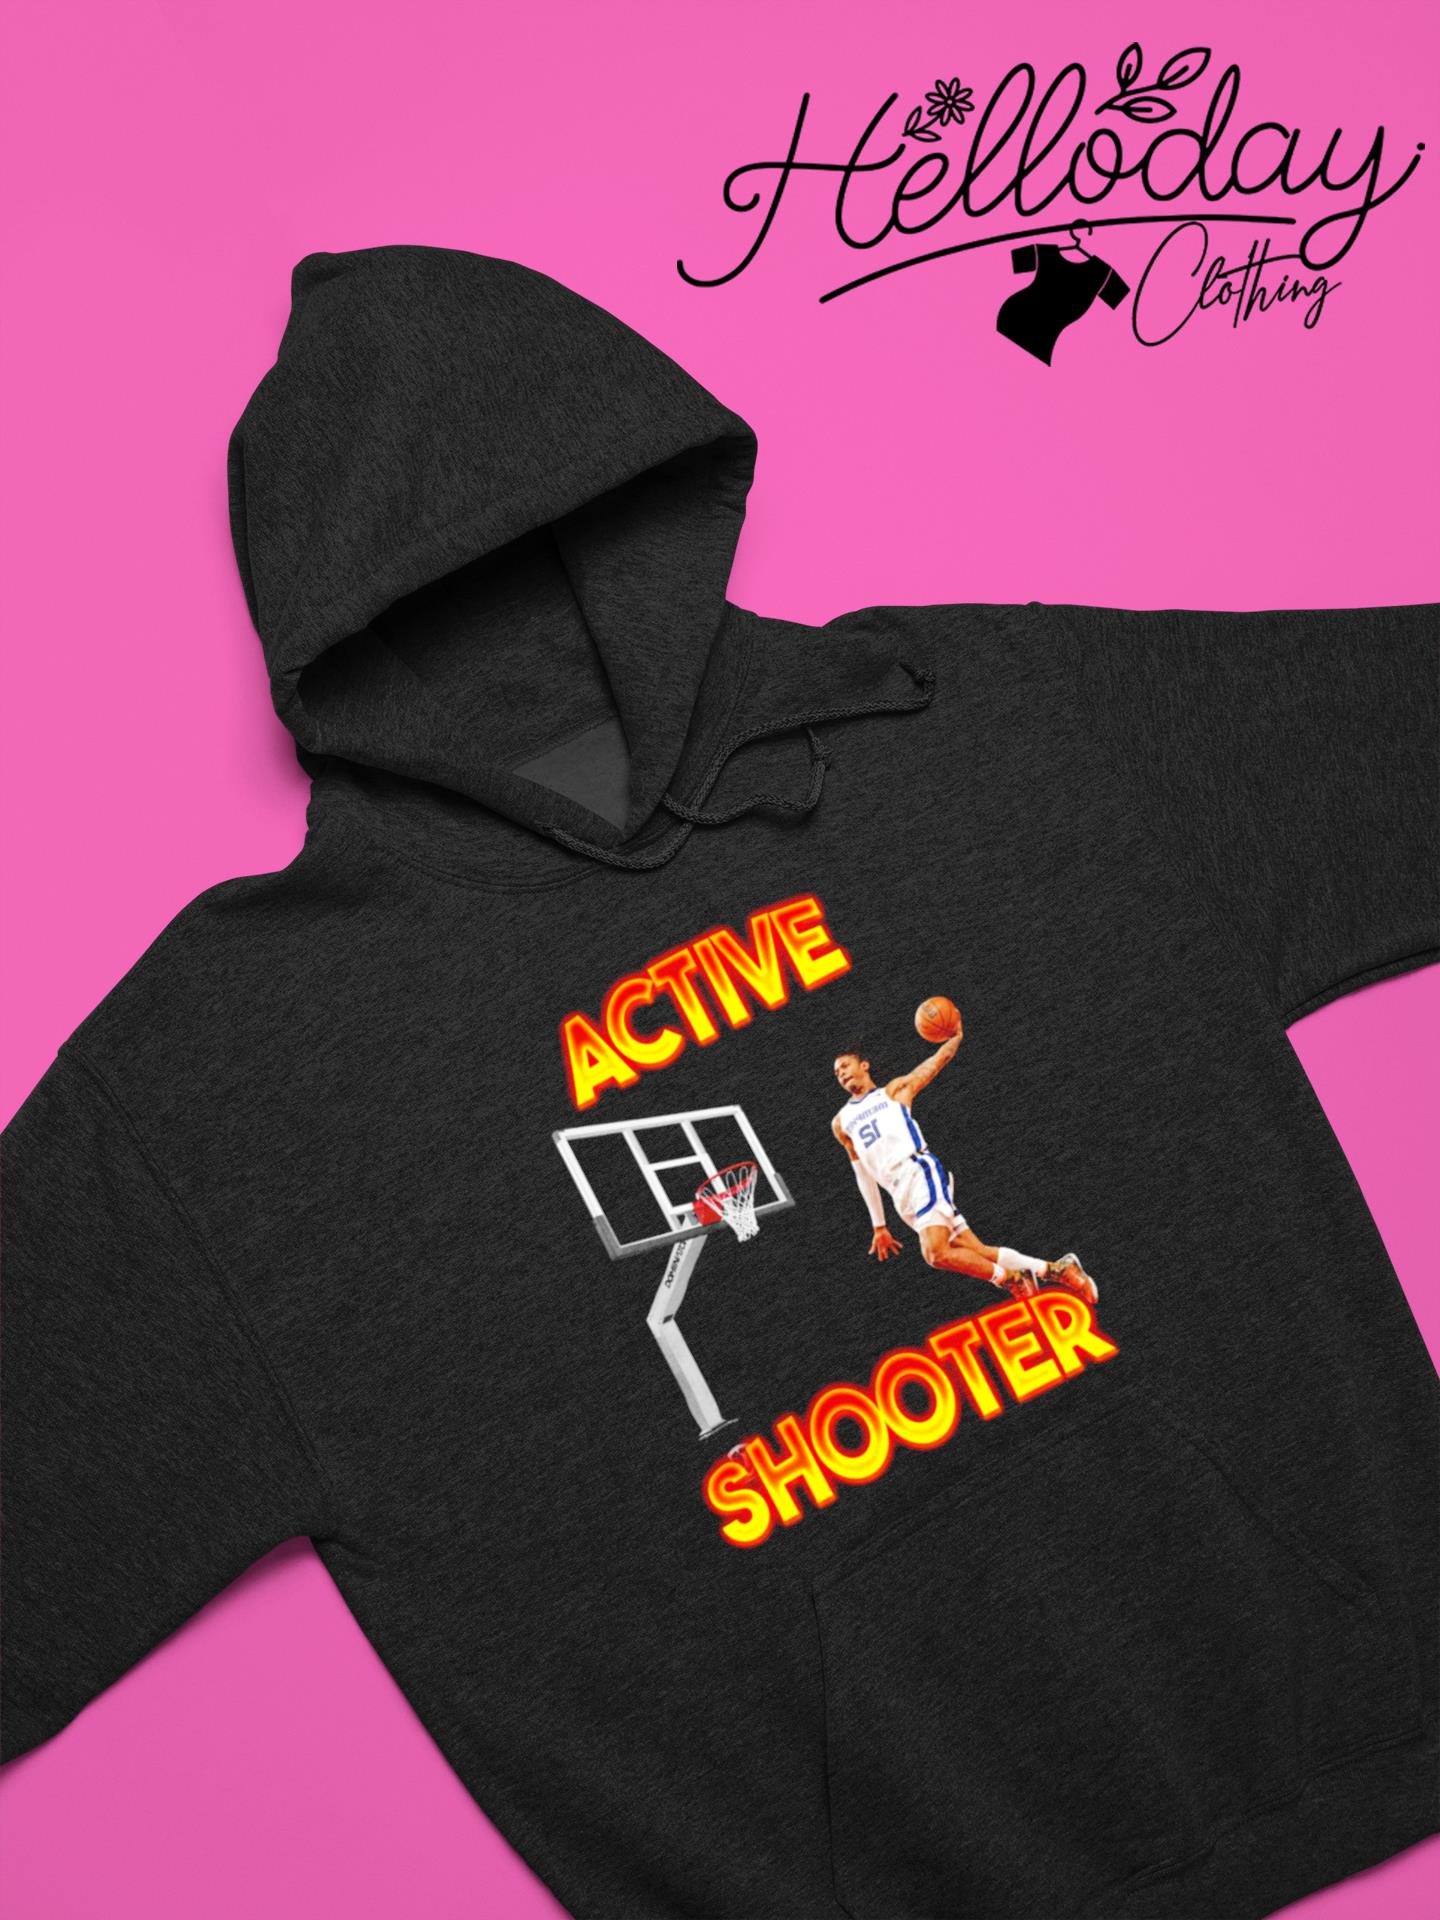 Ja Morant Active Shooter shirt, hoodie, sweater and long sleeve